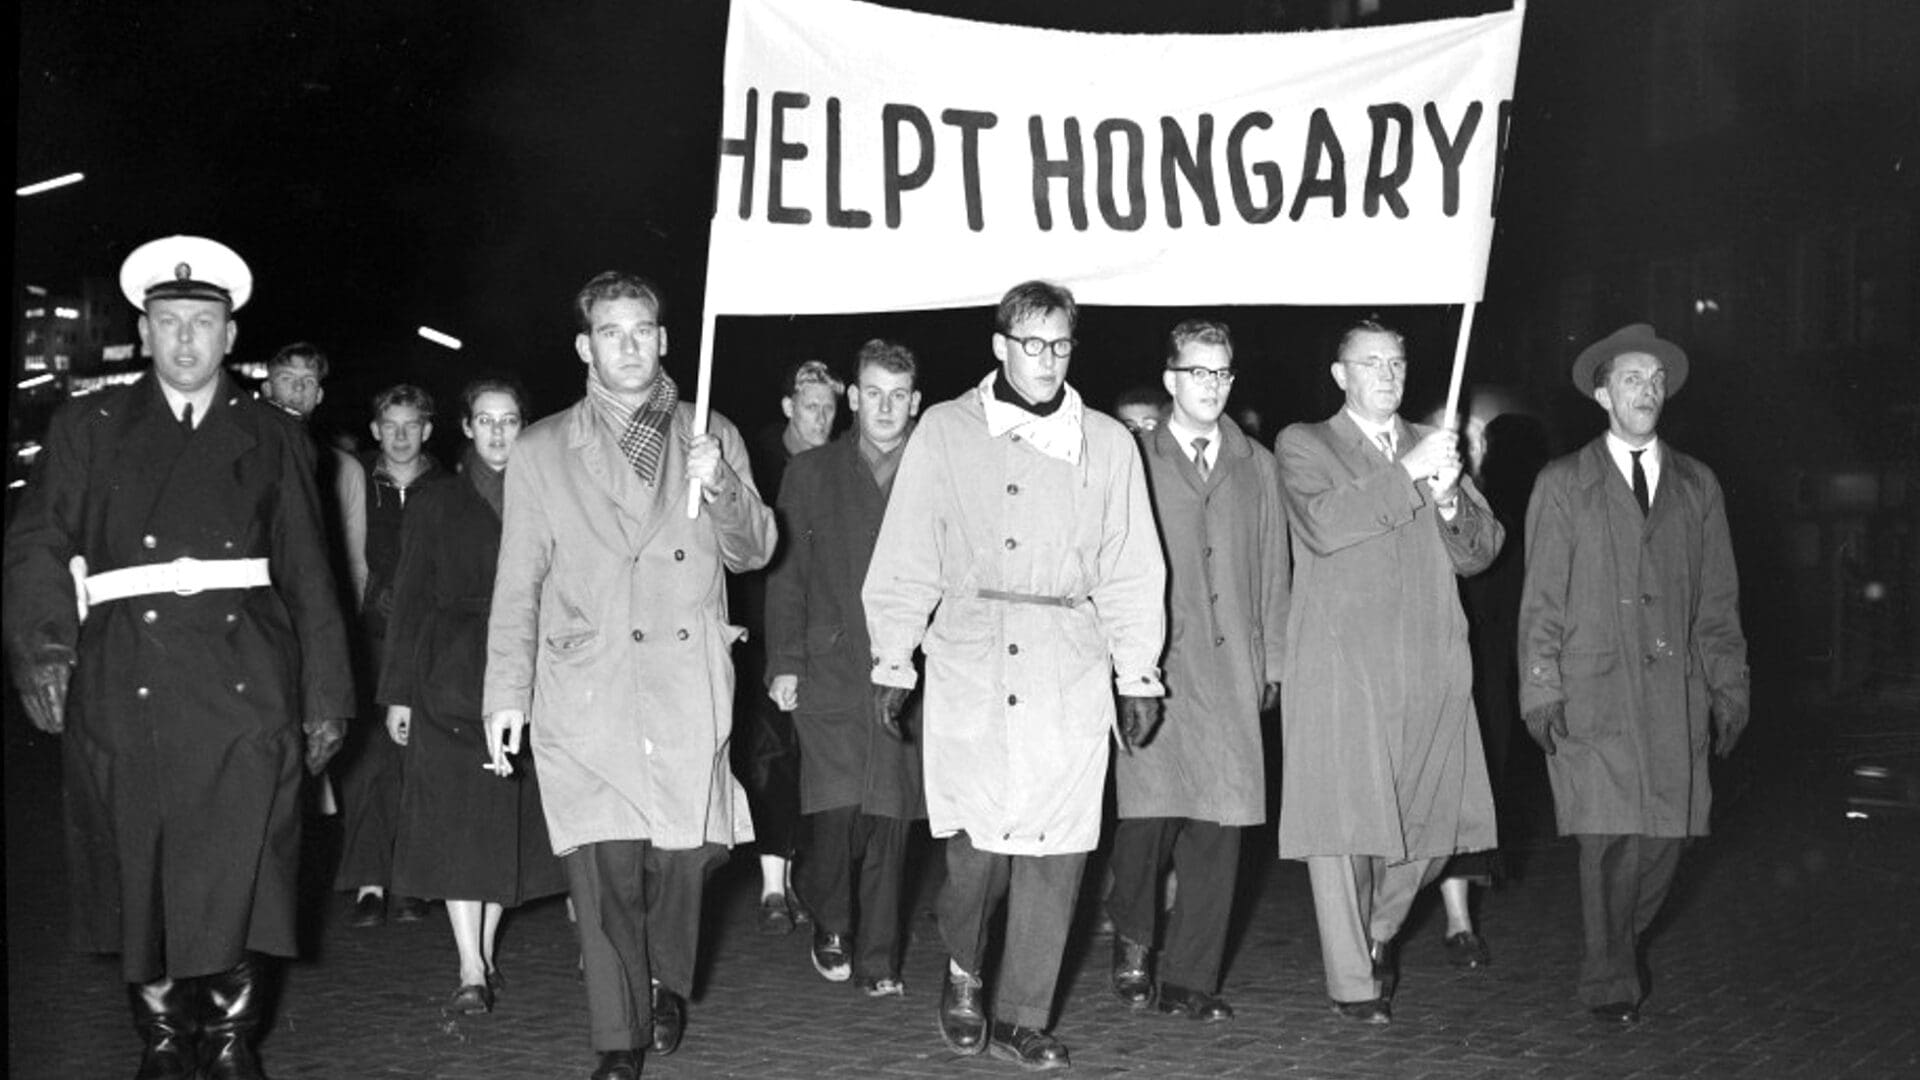 A solidarity march on 5 November 1956 in Eindhoven, the Netherlands. The banner reads ‘Help Hungary’.